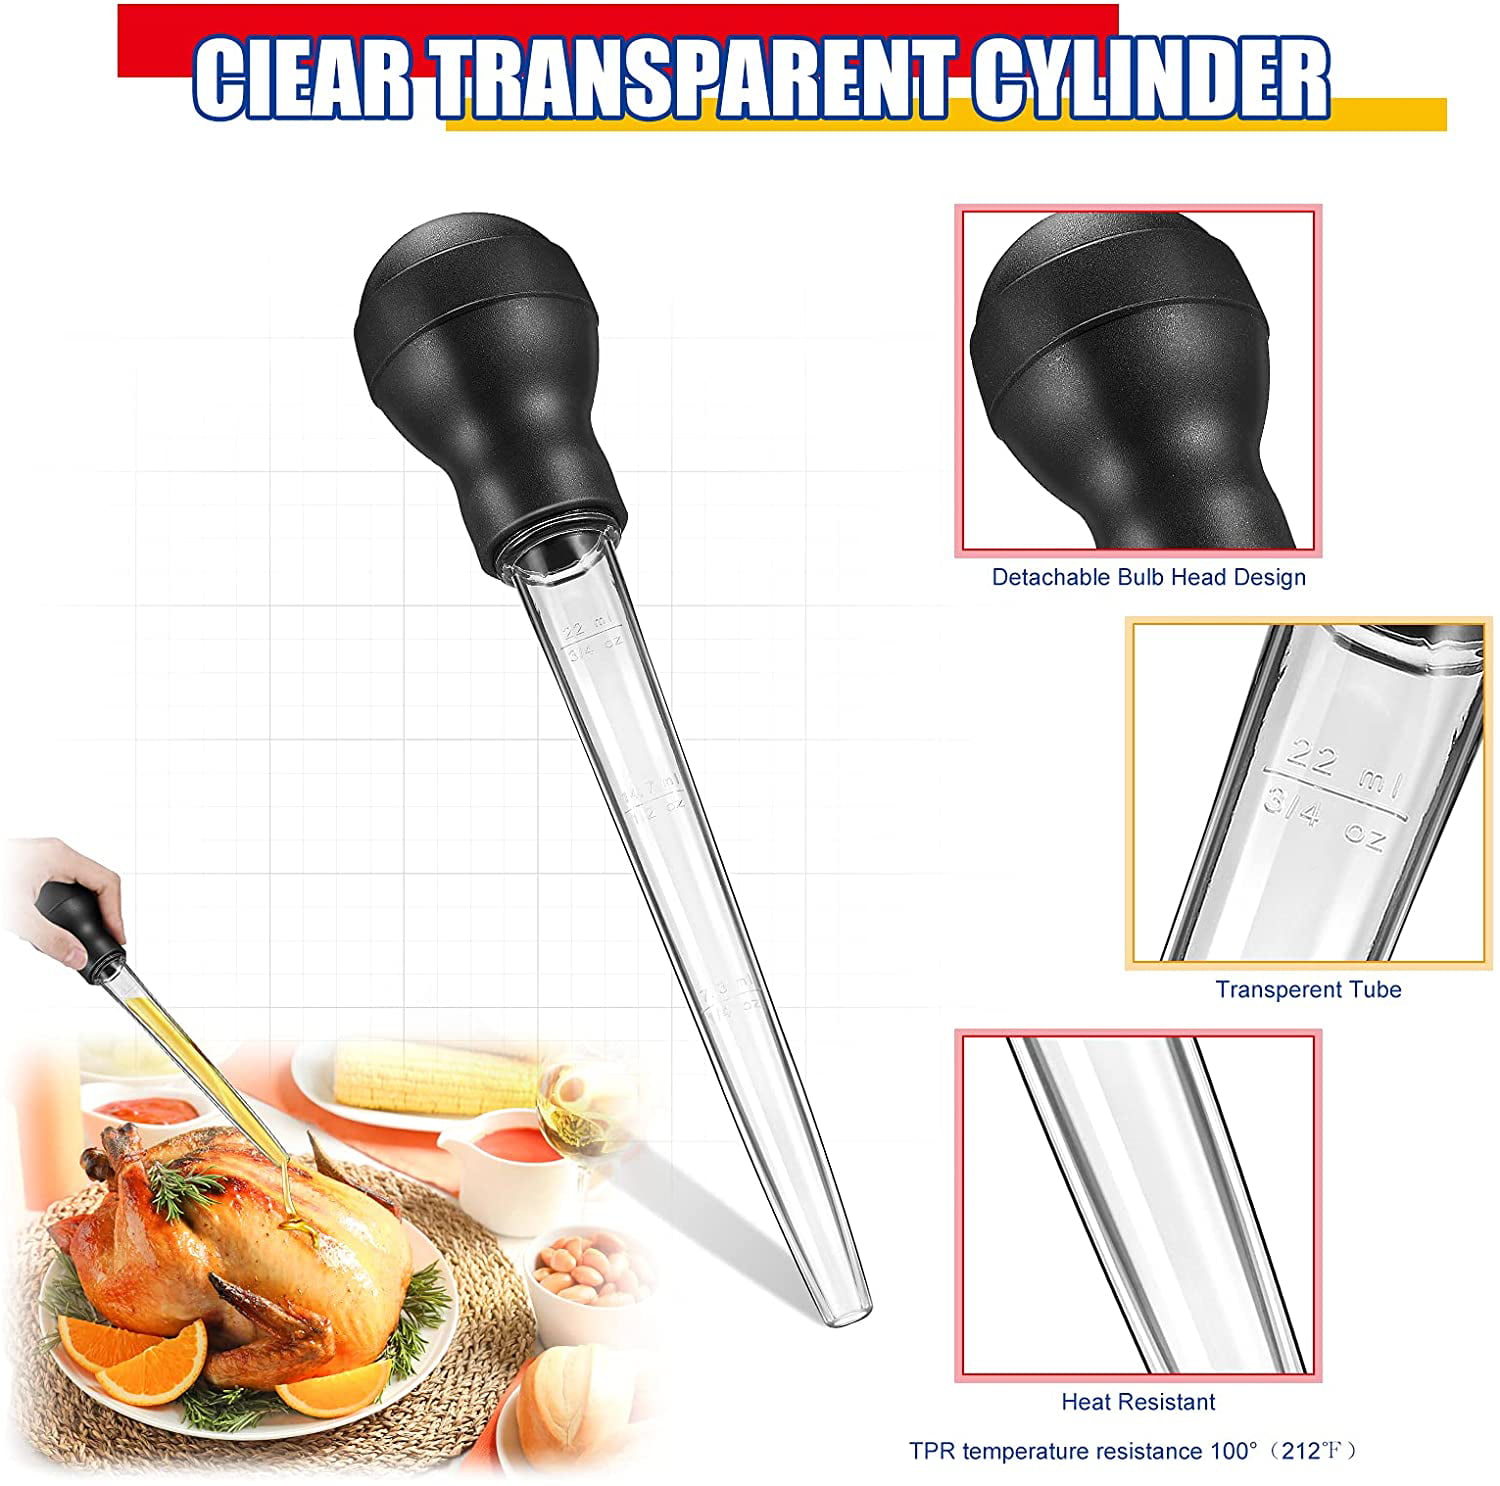 5 Pieces Turkey Baster Nylon Syringe Practical Fluid and Grease Separator High Temperature Resistant Baster Syringe for Cooking Grilling Meat Roasting Barbecue